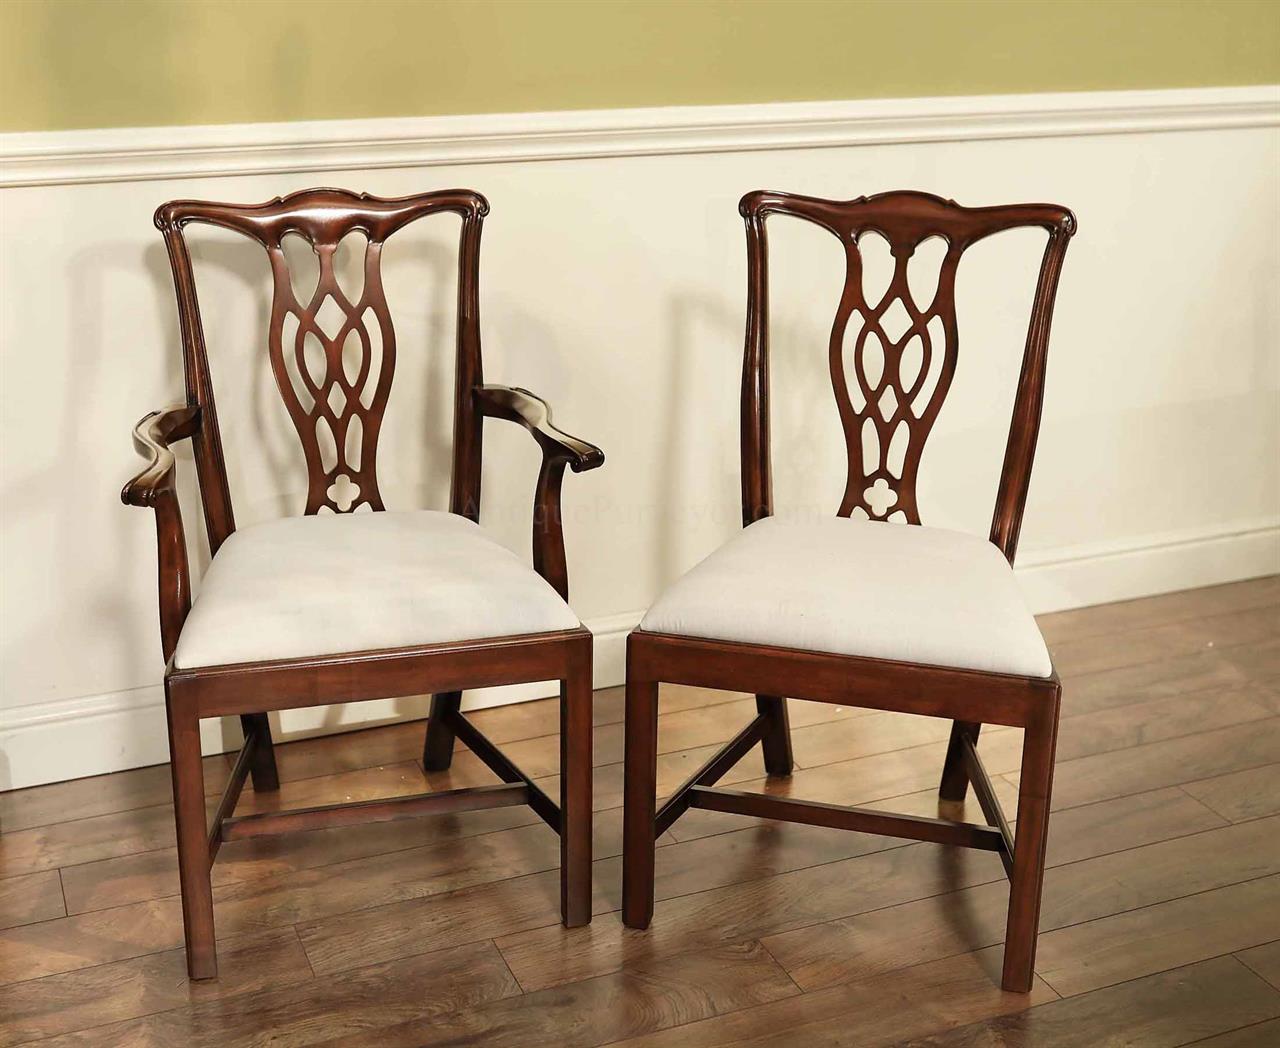 Mahogany Dining Room Chairs With Black Leather